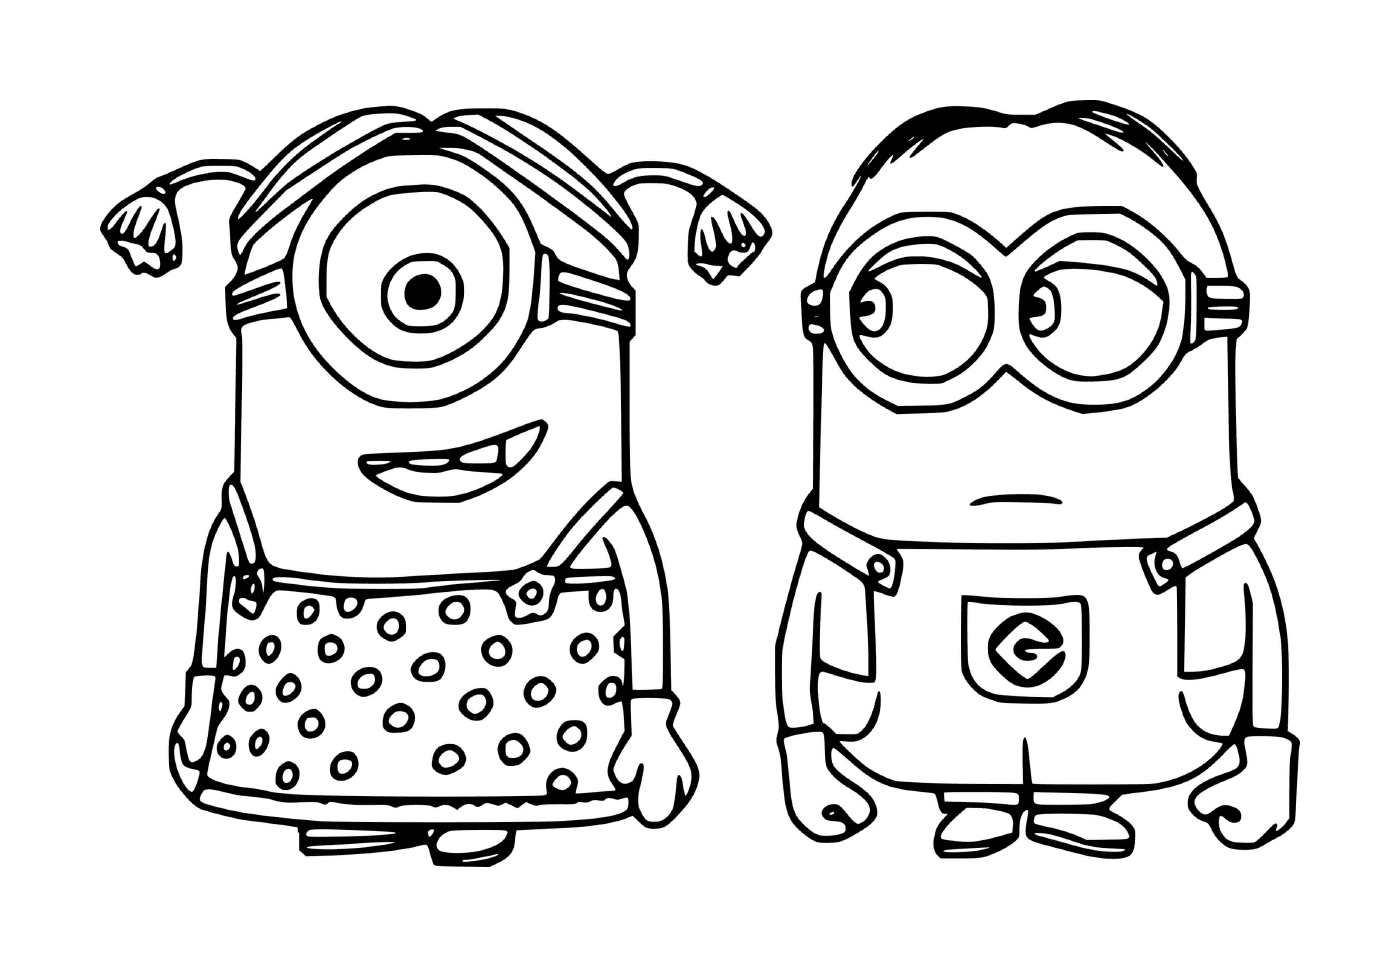  Dave and Stuart Minion together 